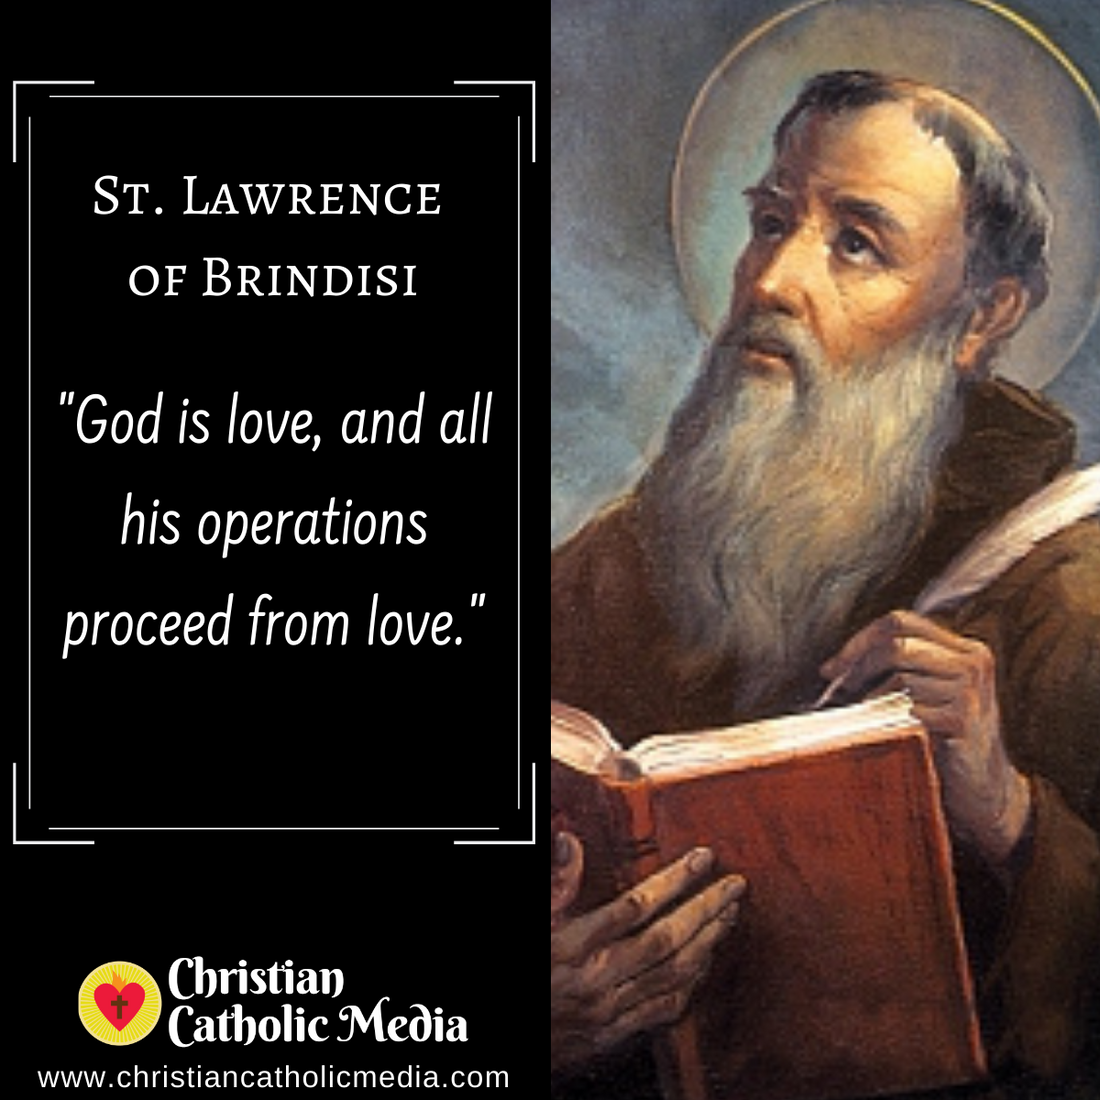 St. Lawrence of Brindisi - Thursday July 21, 2022